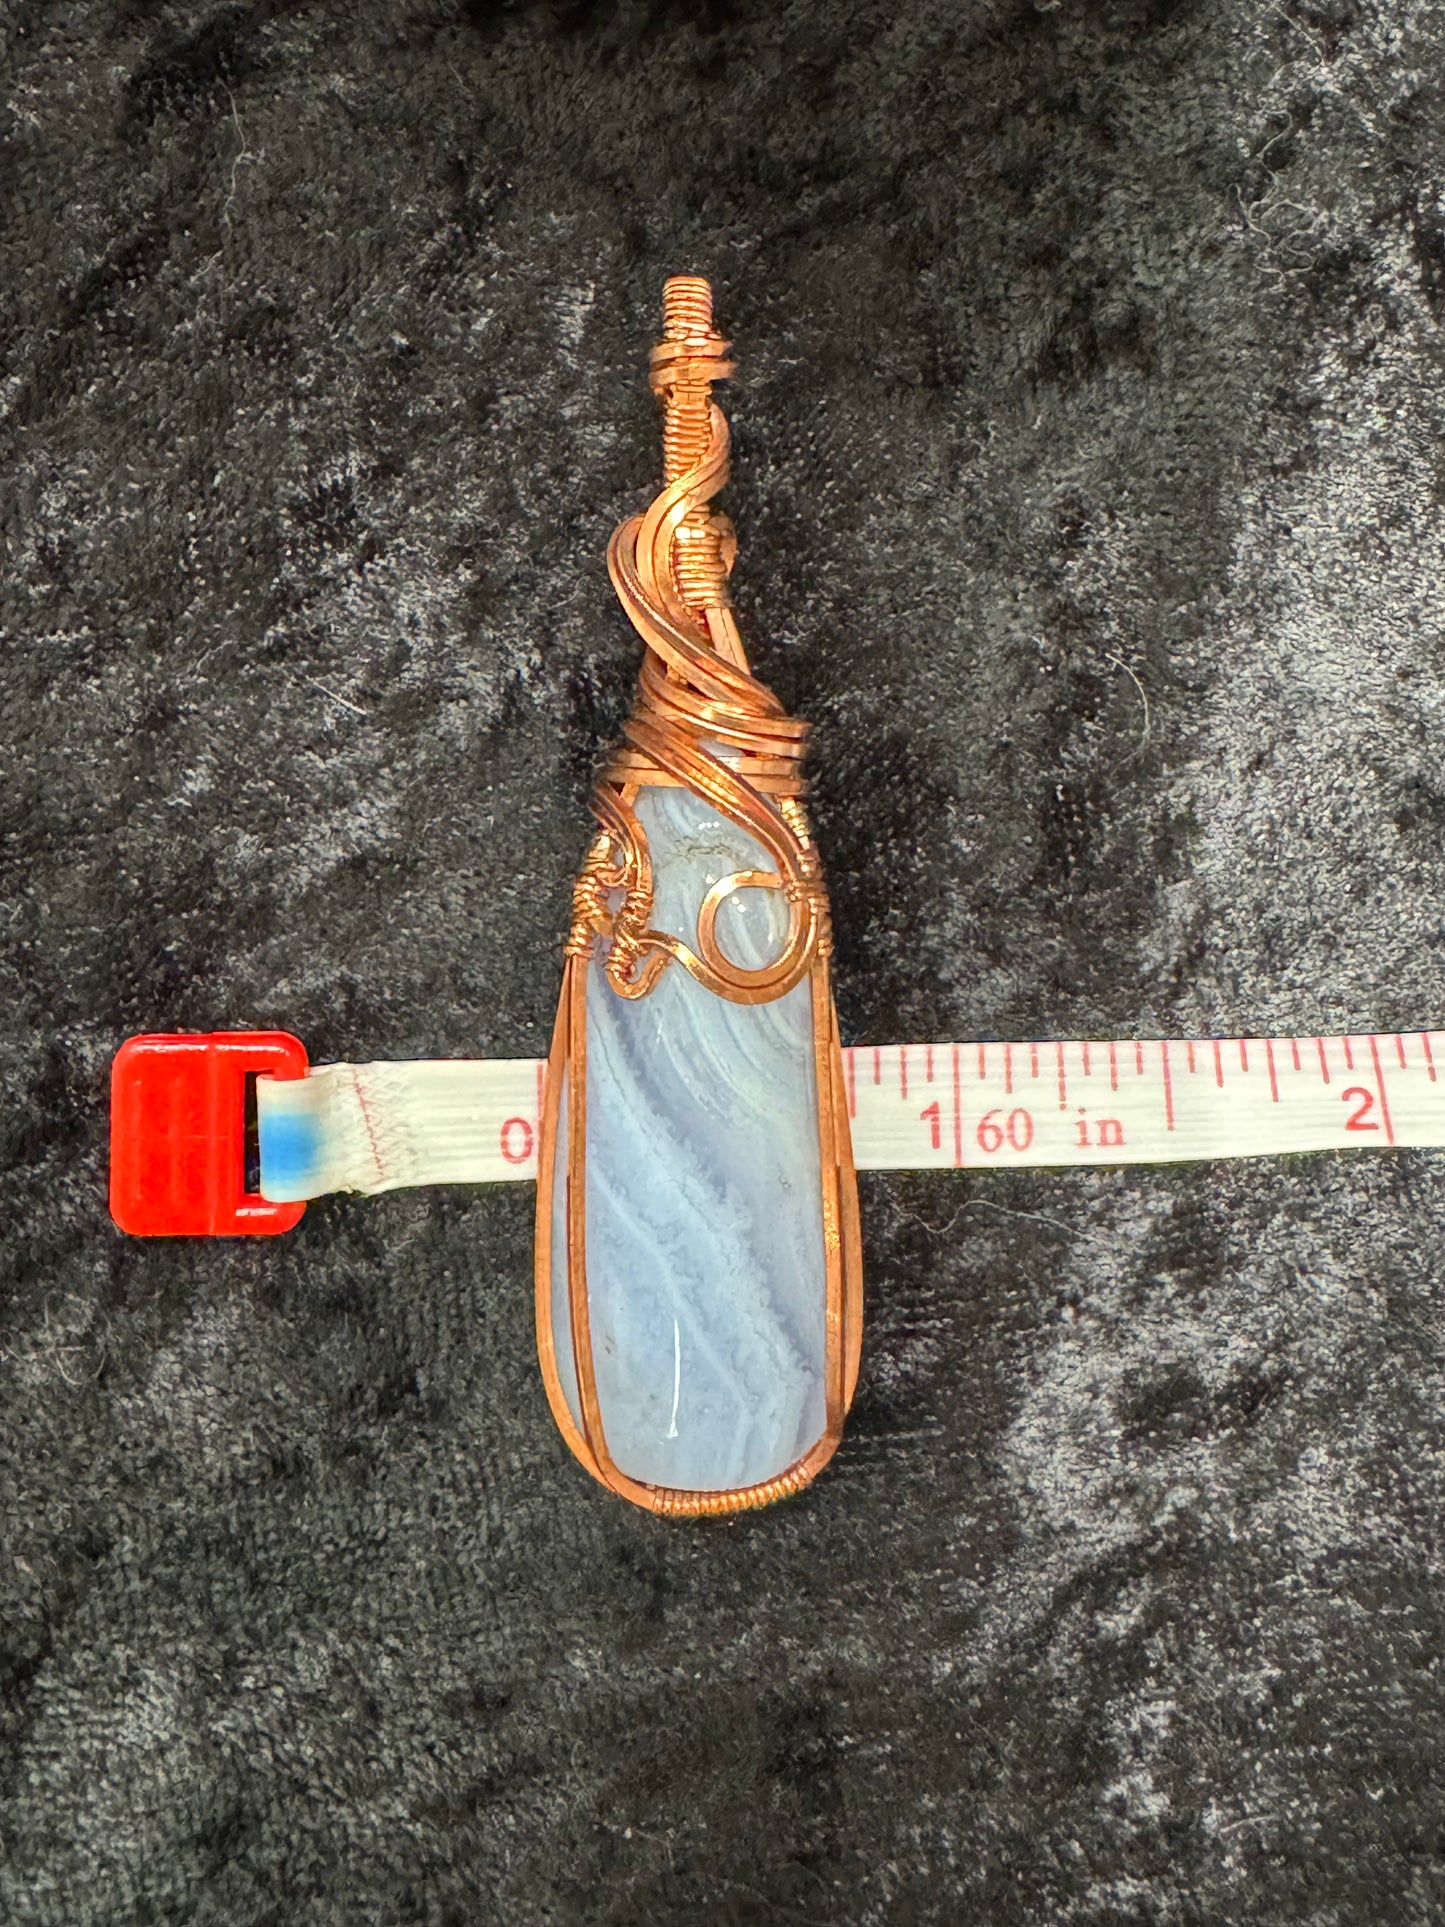 Blue Lace Agate wire wrapped pendant -